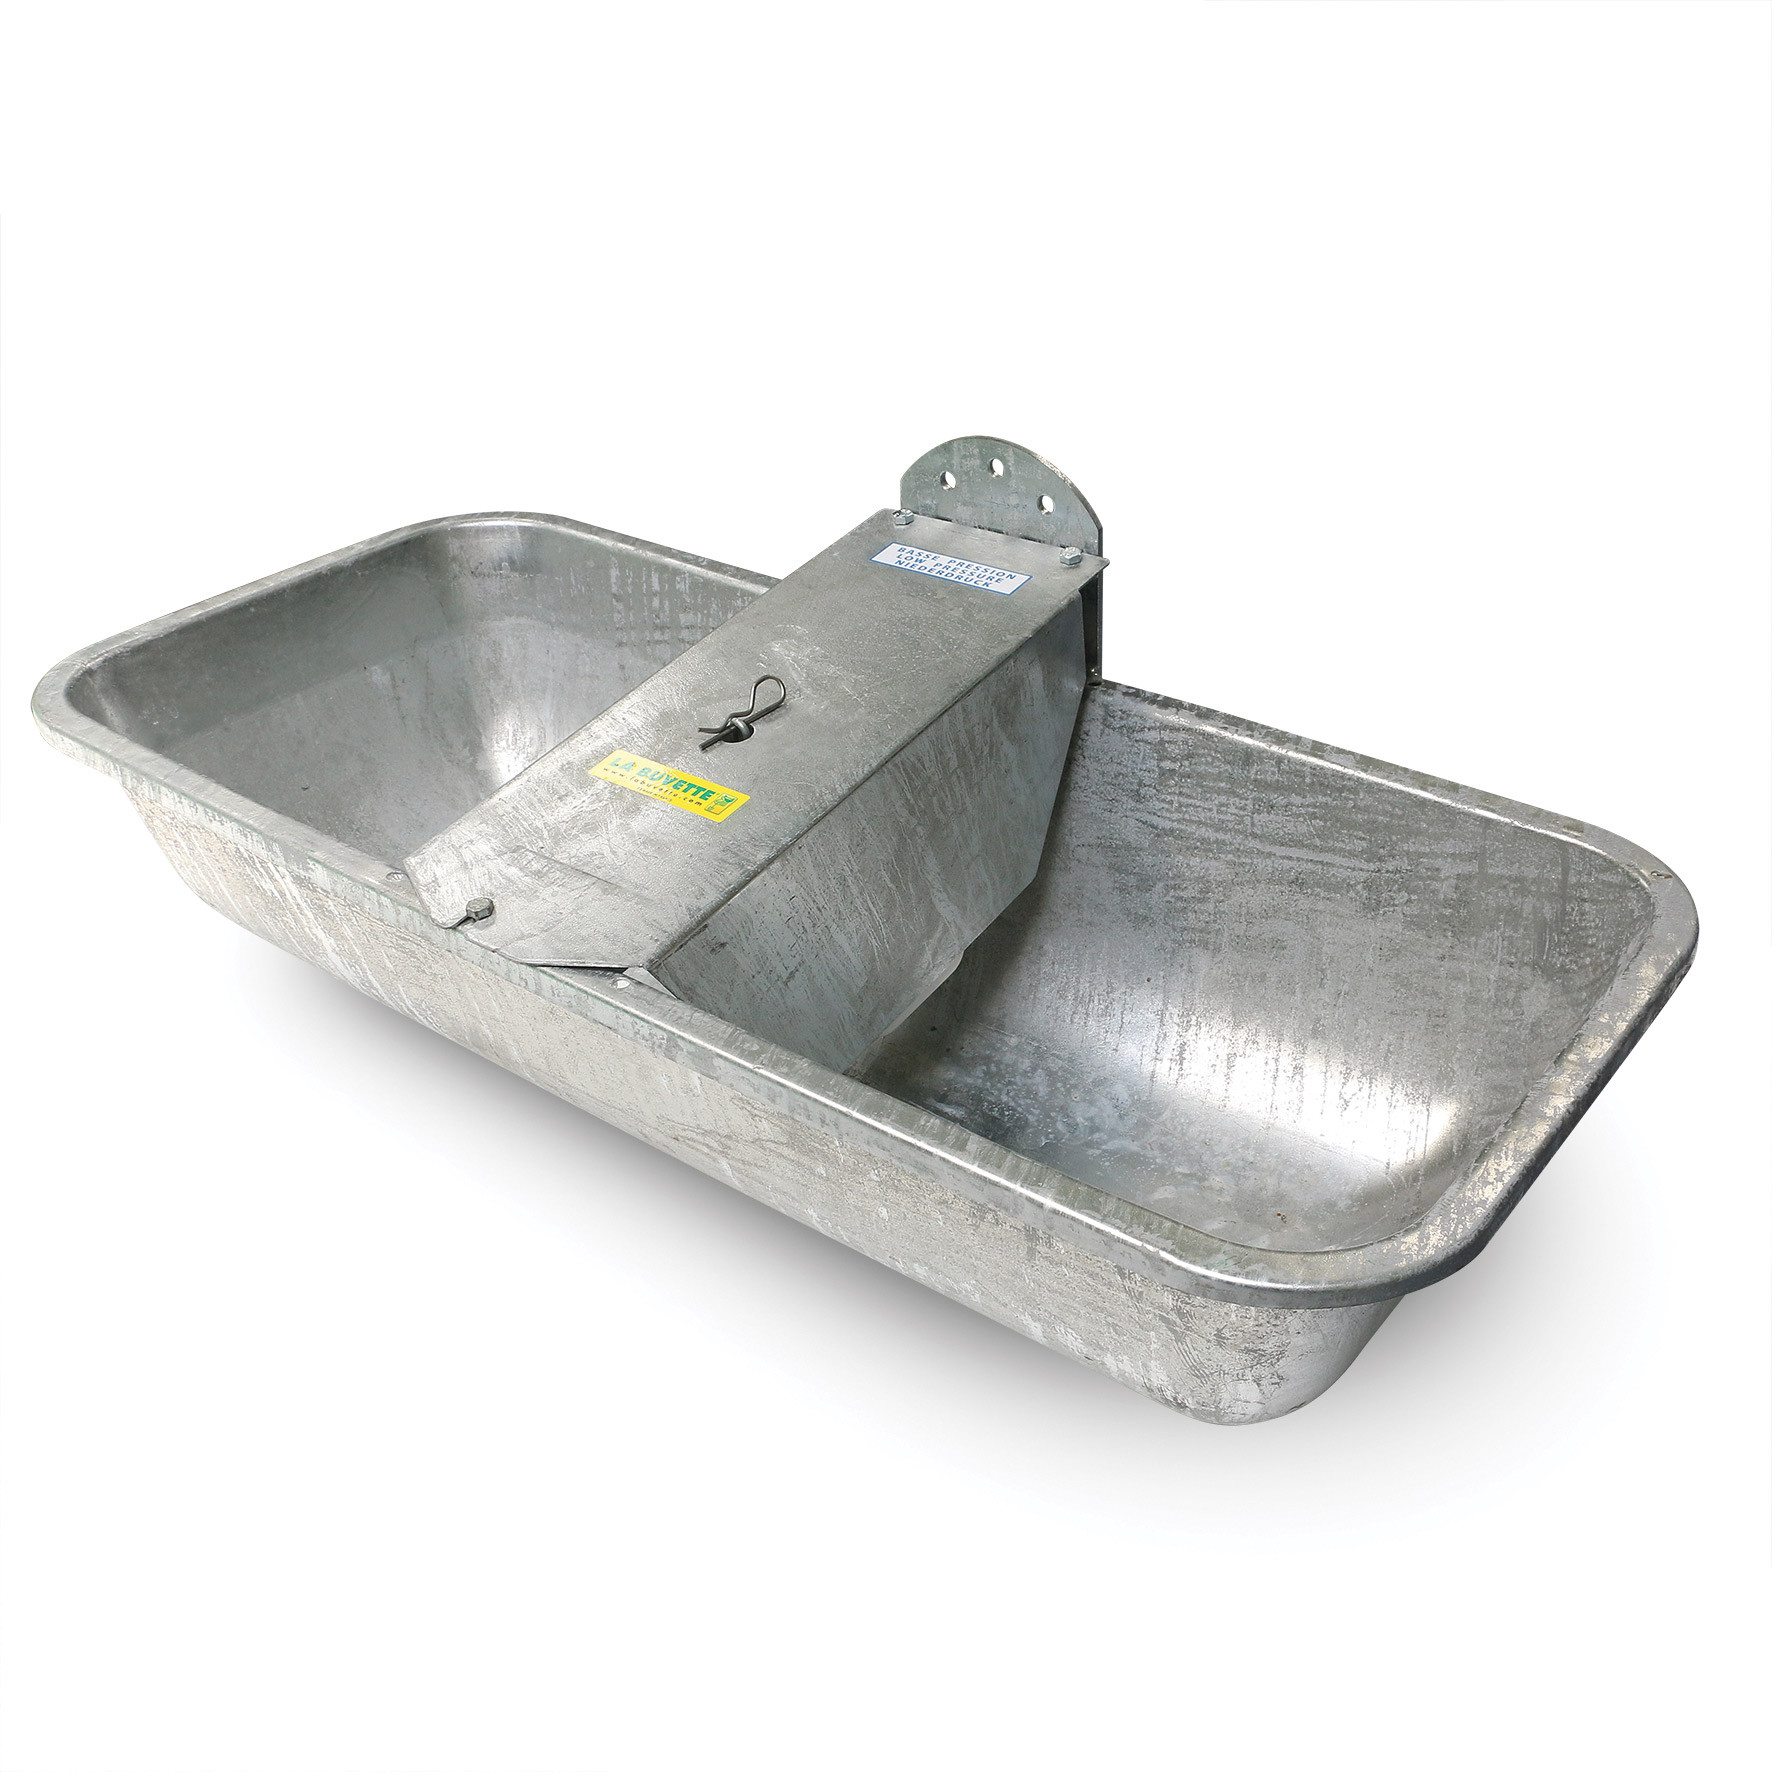 GALVALAC 65T double drinking trough